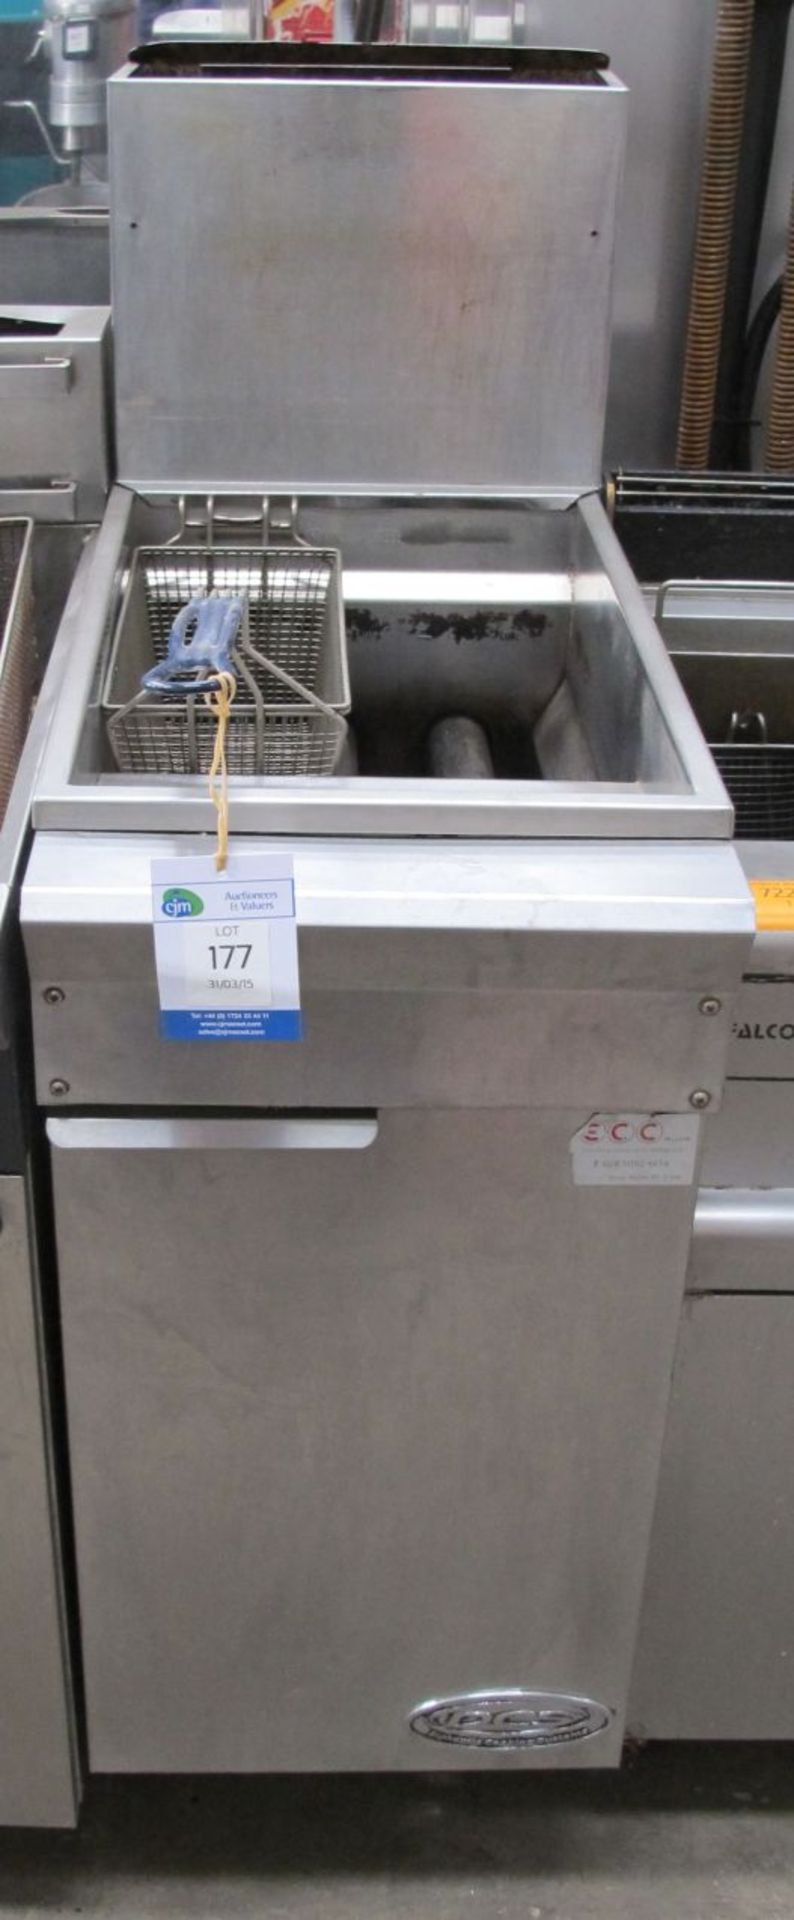 * DCS Stainless Steel Gas Twin Basket Deep Fat Fryer.  Please note there is a £5 plus VAT handling